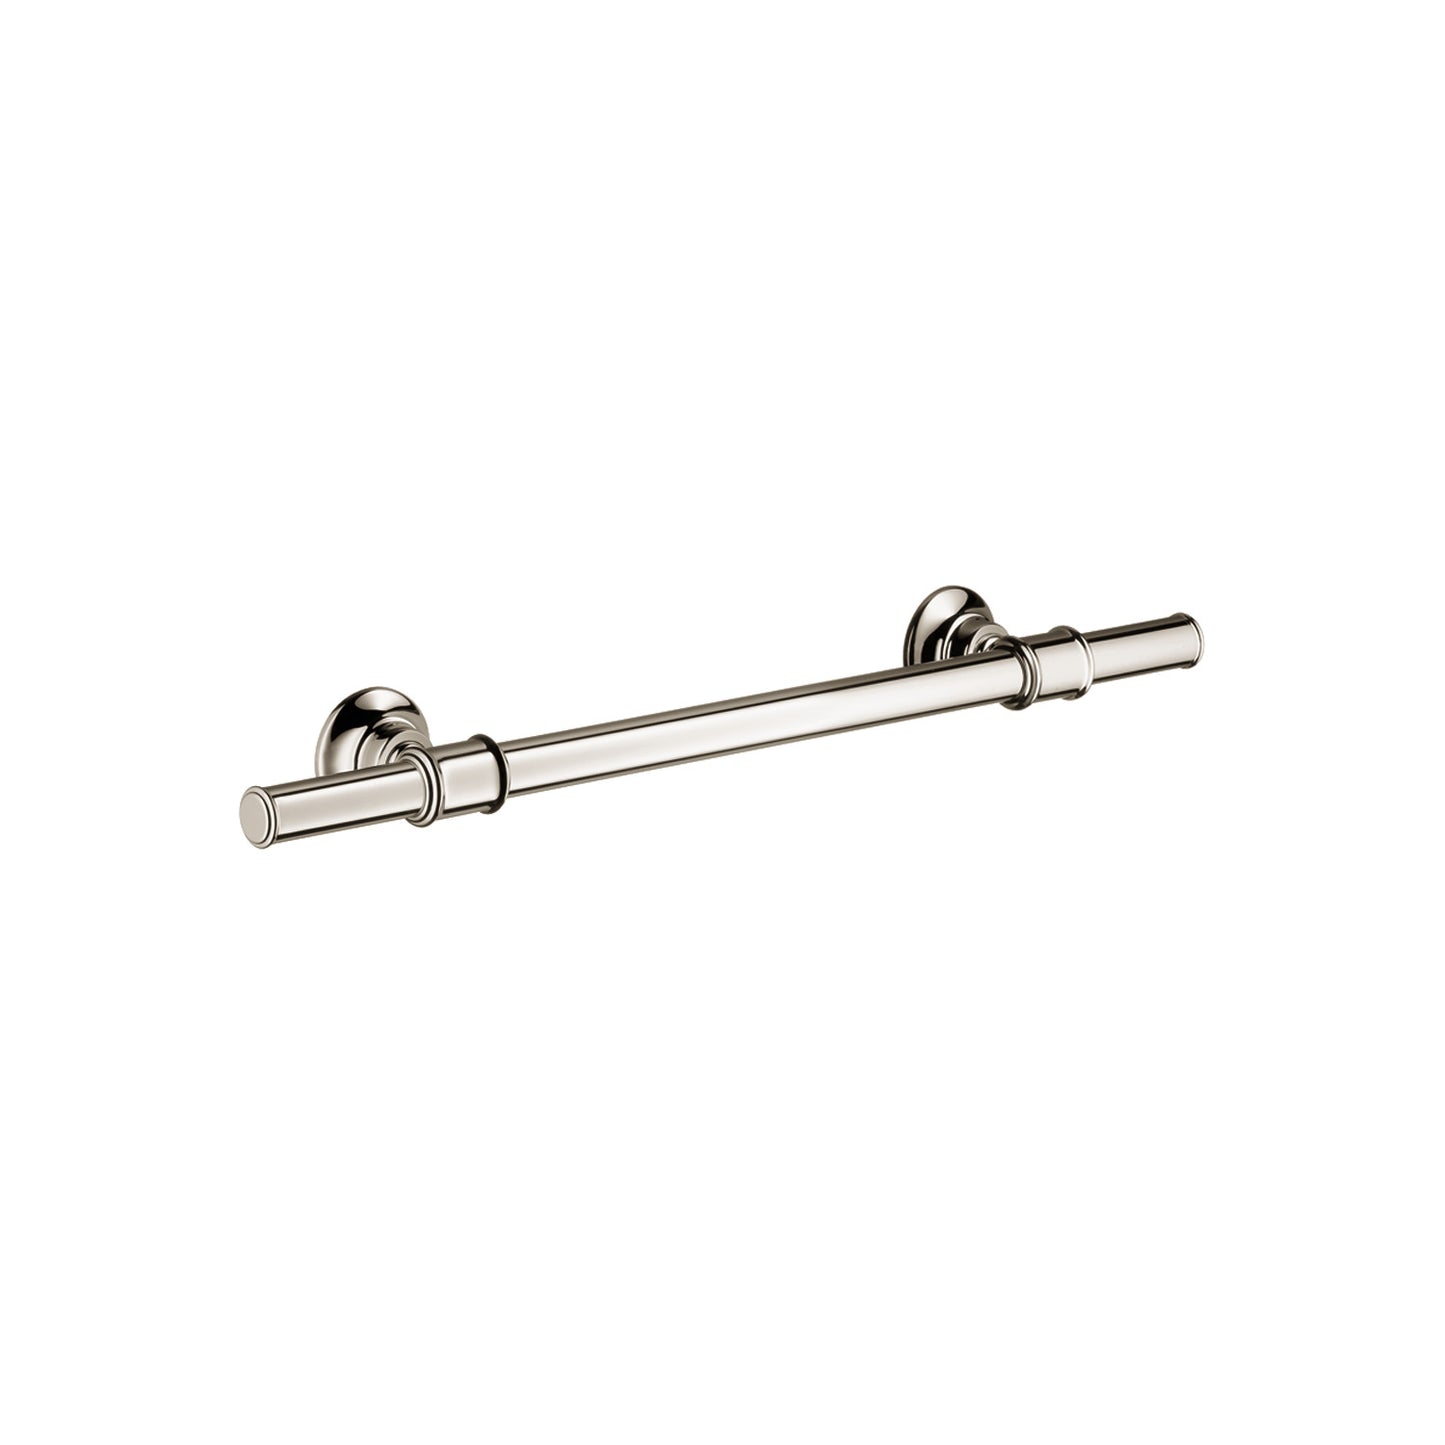 AXOR 42030830 Polished Nickel Montreux Classic Towel Bar